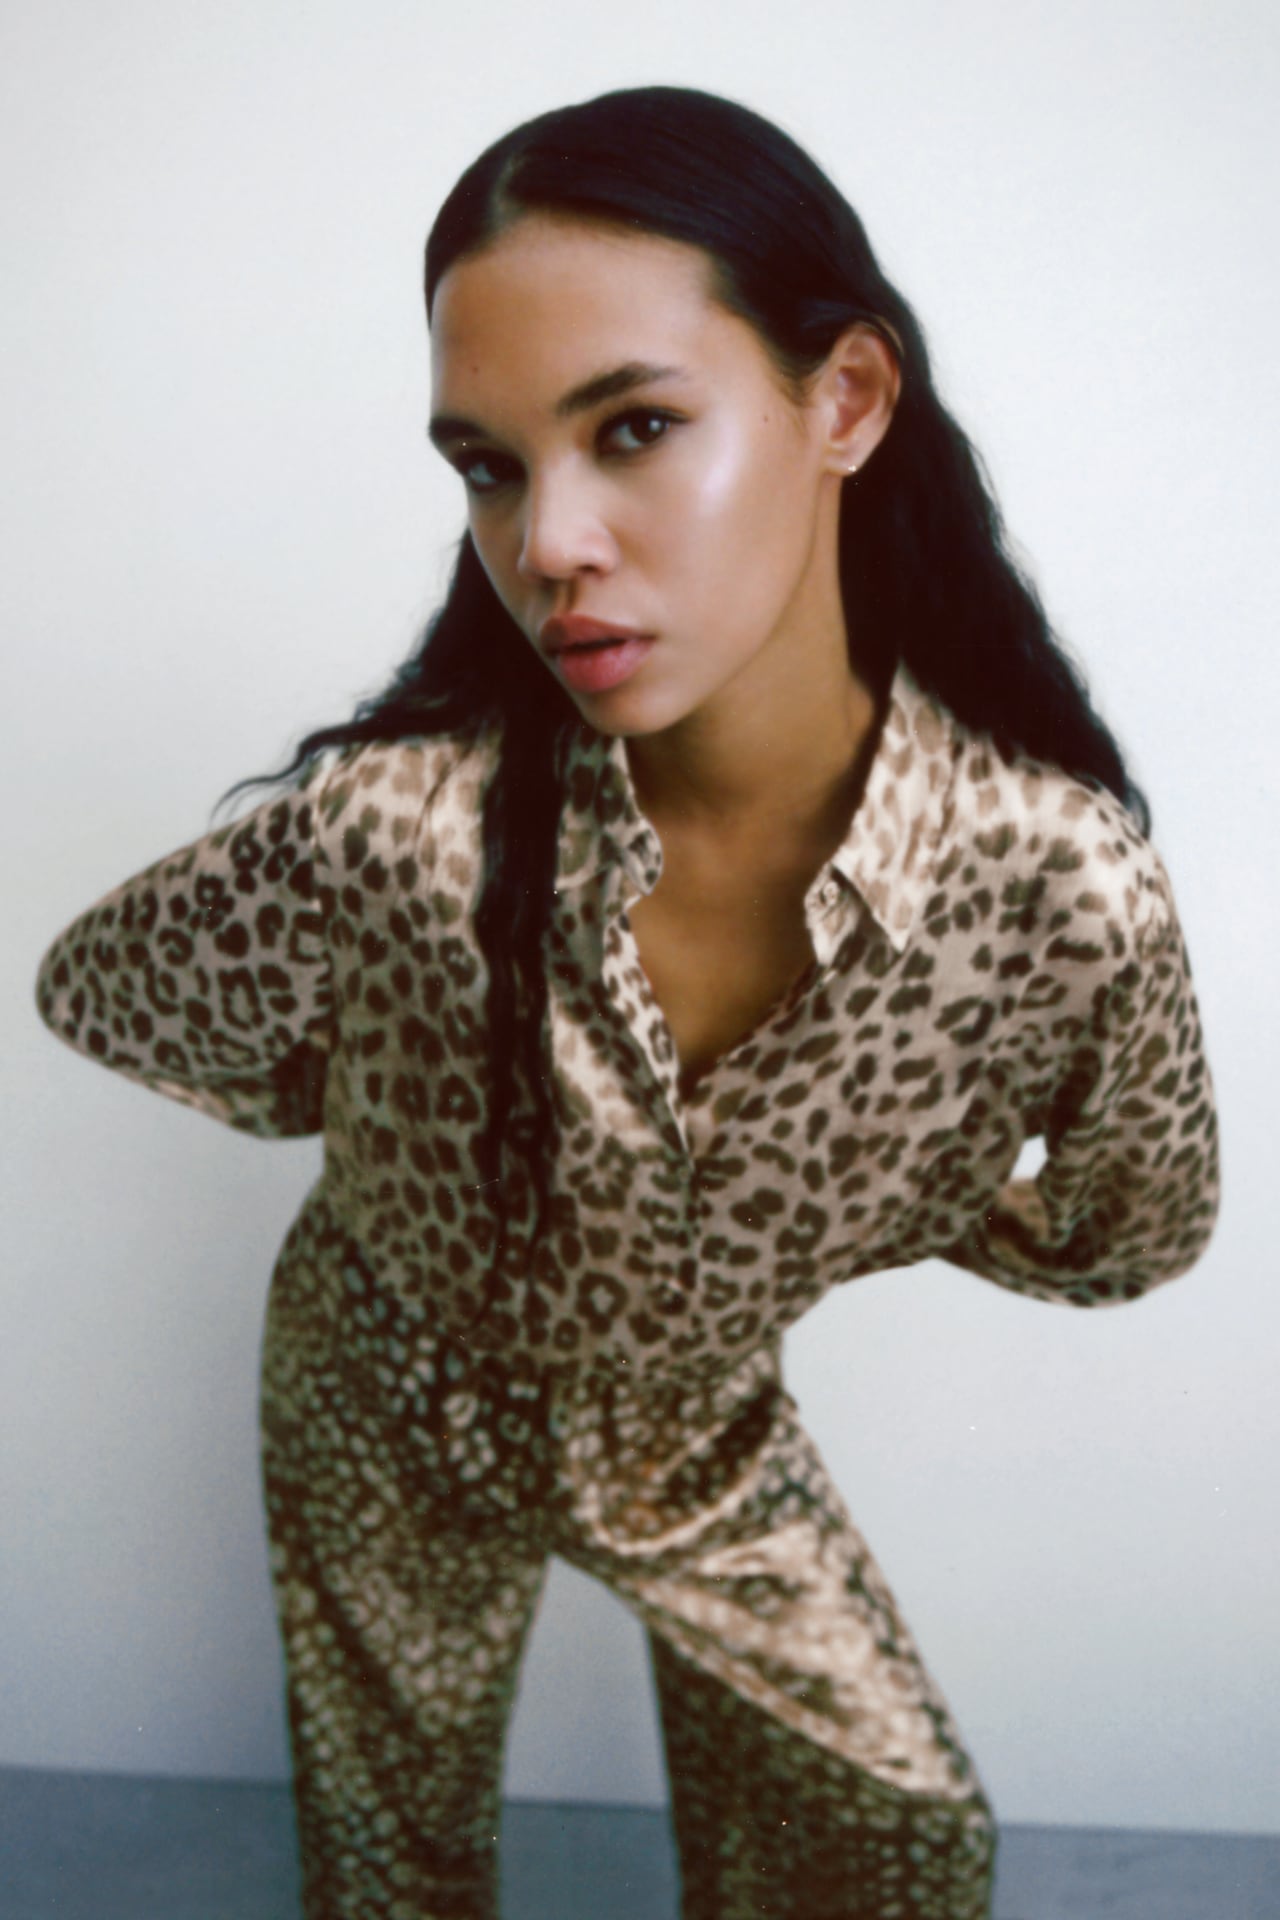 Blurred image of a woman with long dark hair wearing a beige ANIMAL leopard PRINT OVERSIZE SHIRT from Zara with matching trousers and looking into the camera